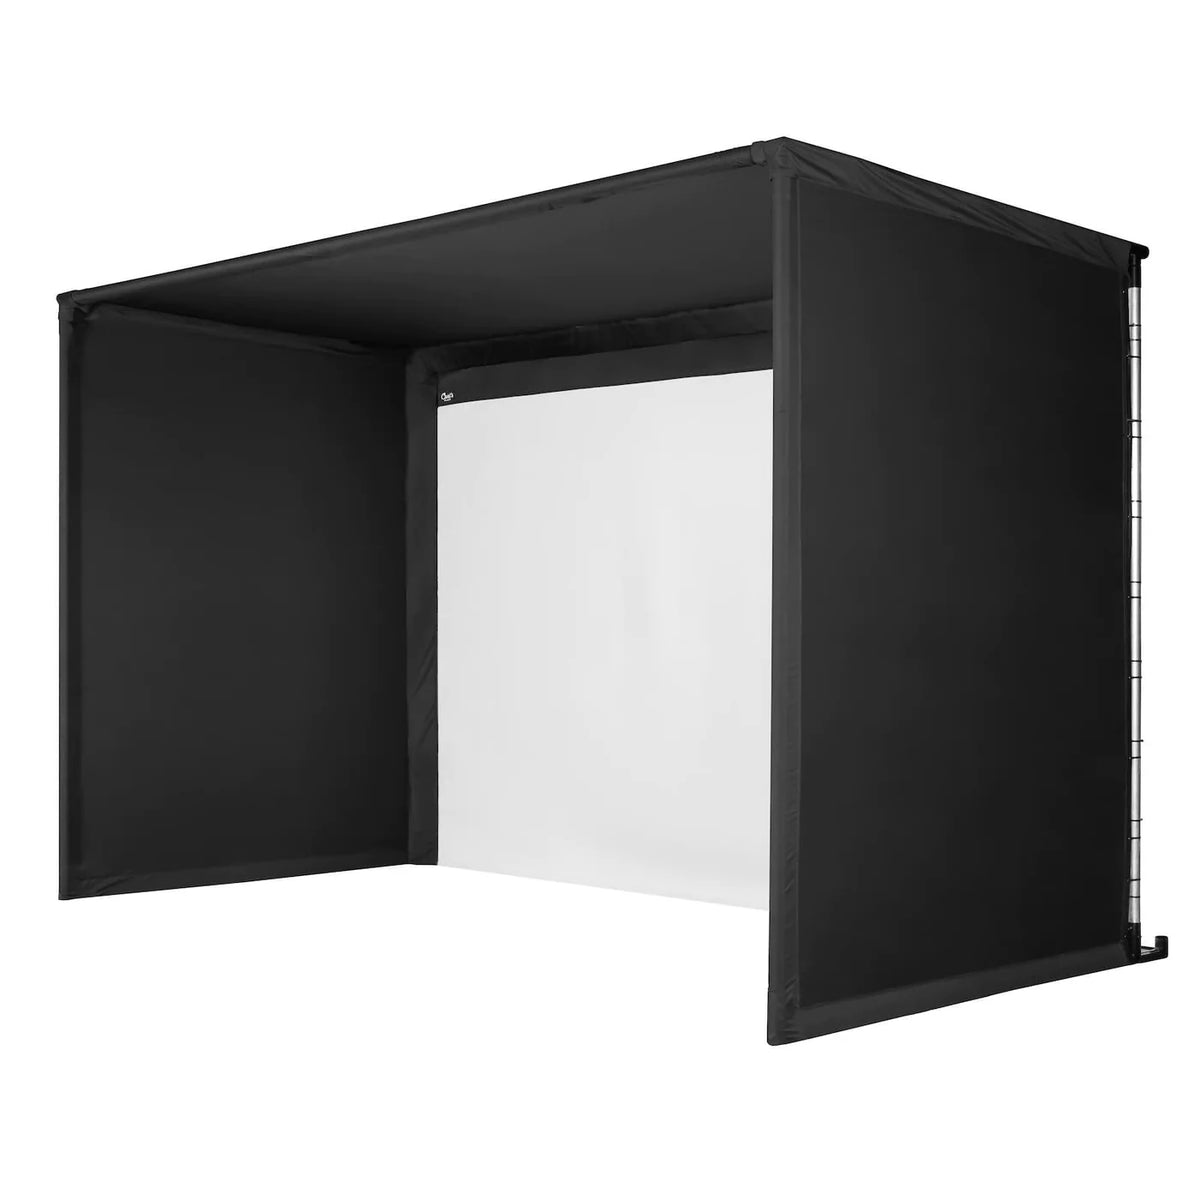 Carl&#39;s Place: Pro Golf Simulator Enclosure Kit with Impact Screen